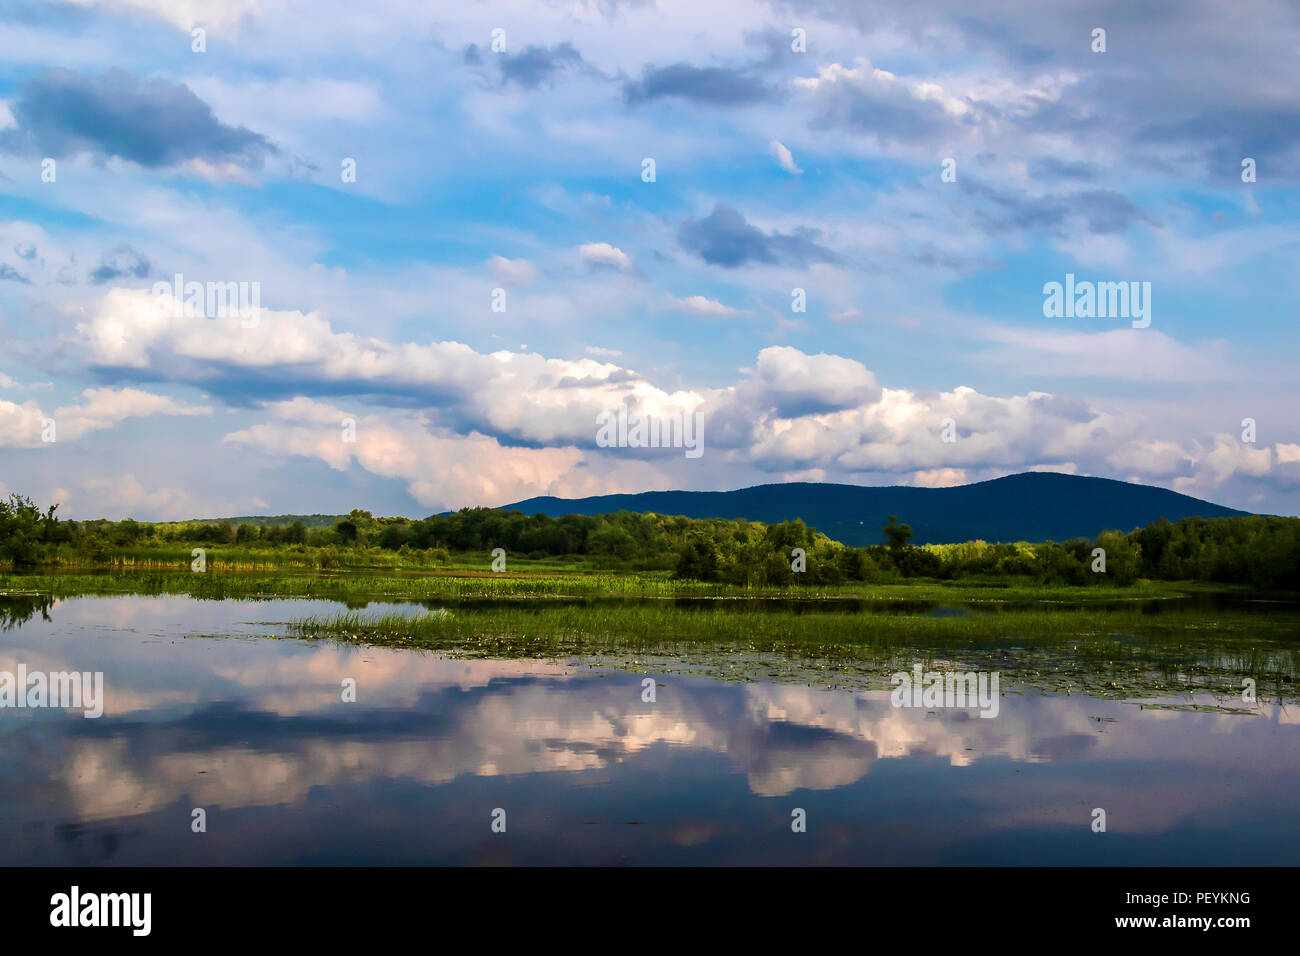 Nature around Lac Boivin in Granby, Eastern Townships, Quebec, Canada. View of landscape from Lac Boivin. Mont Shefford in the background. Stock Photo